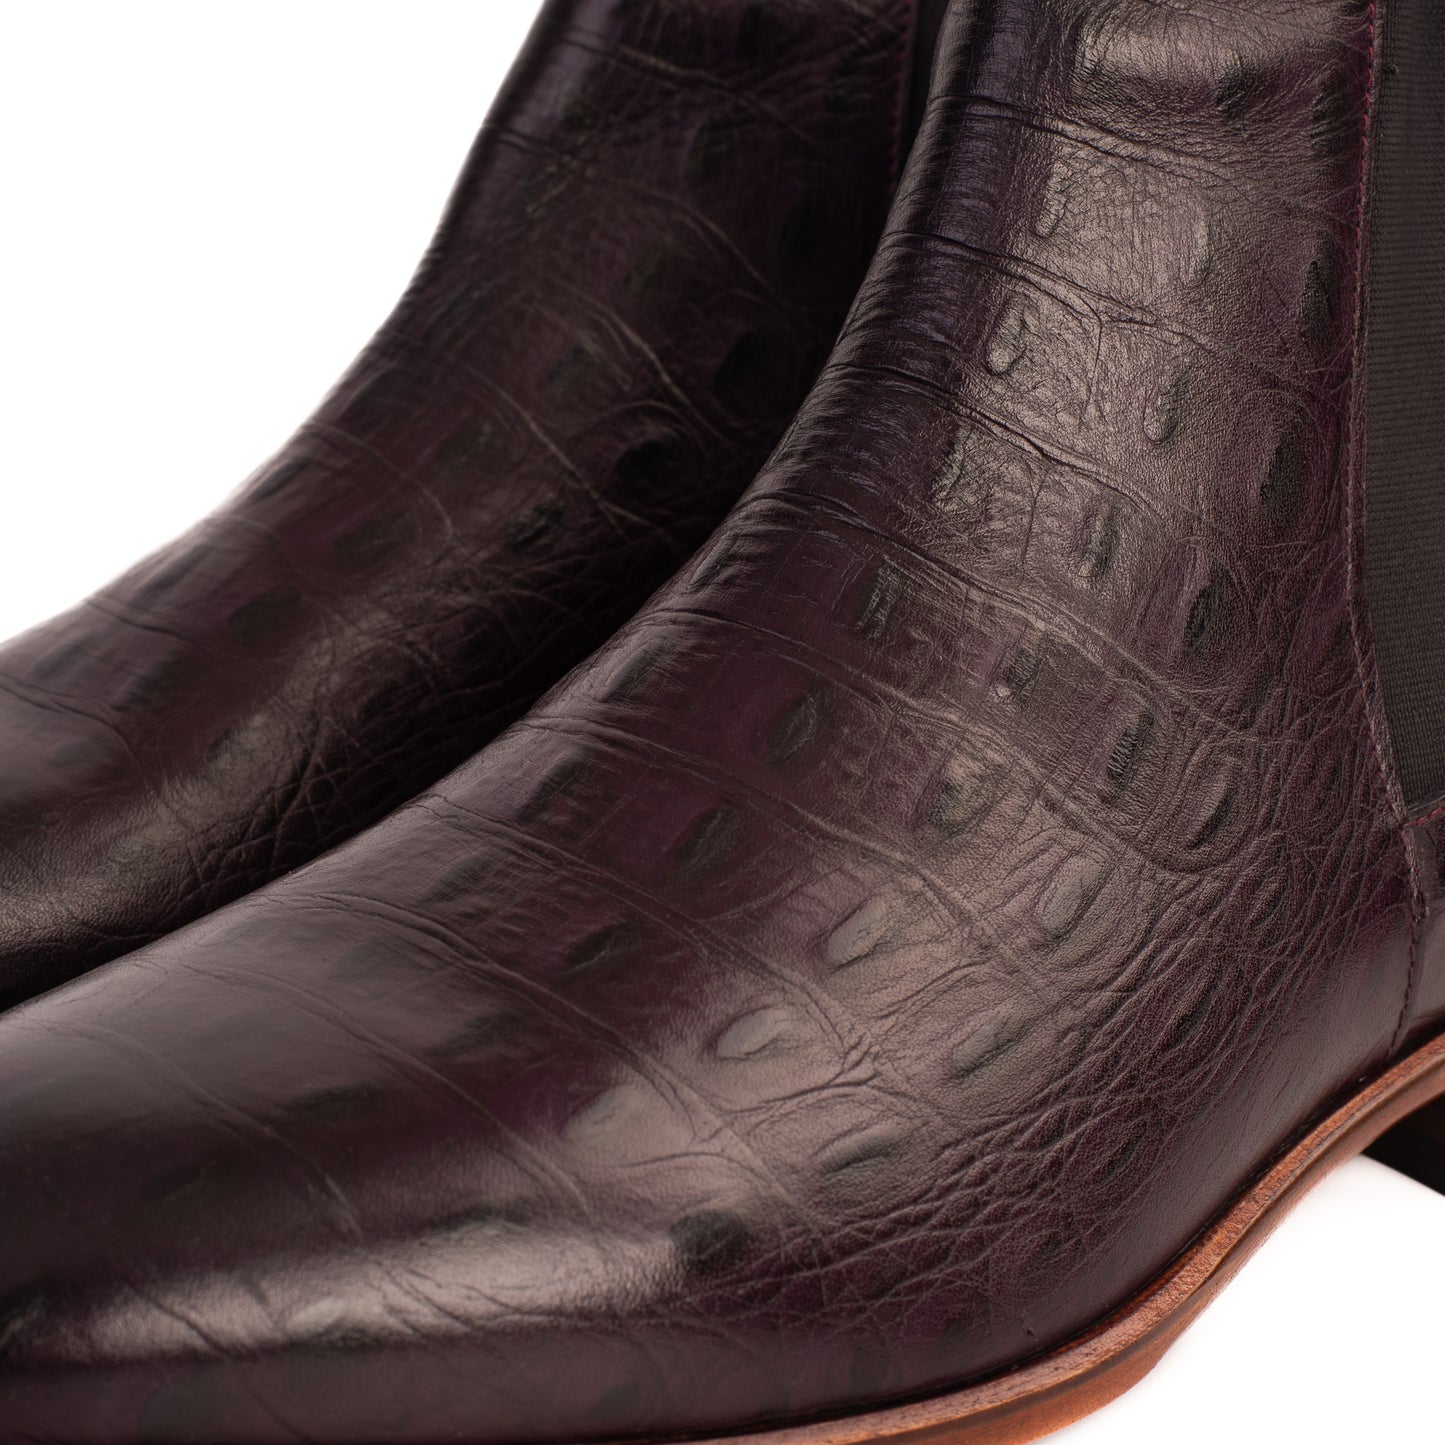 The Sirocco Burgundy Leather Chelsea Dress Men Boot